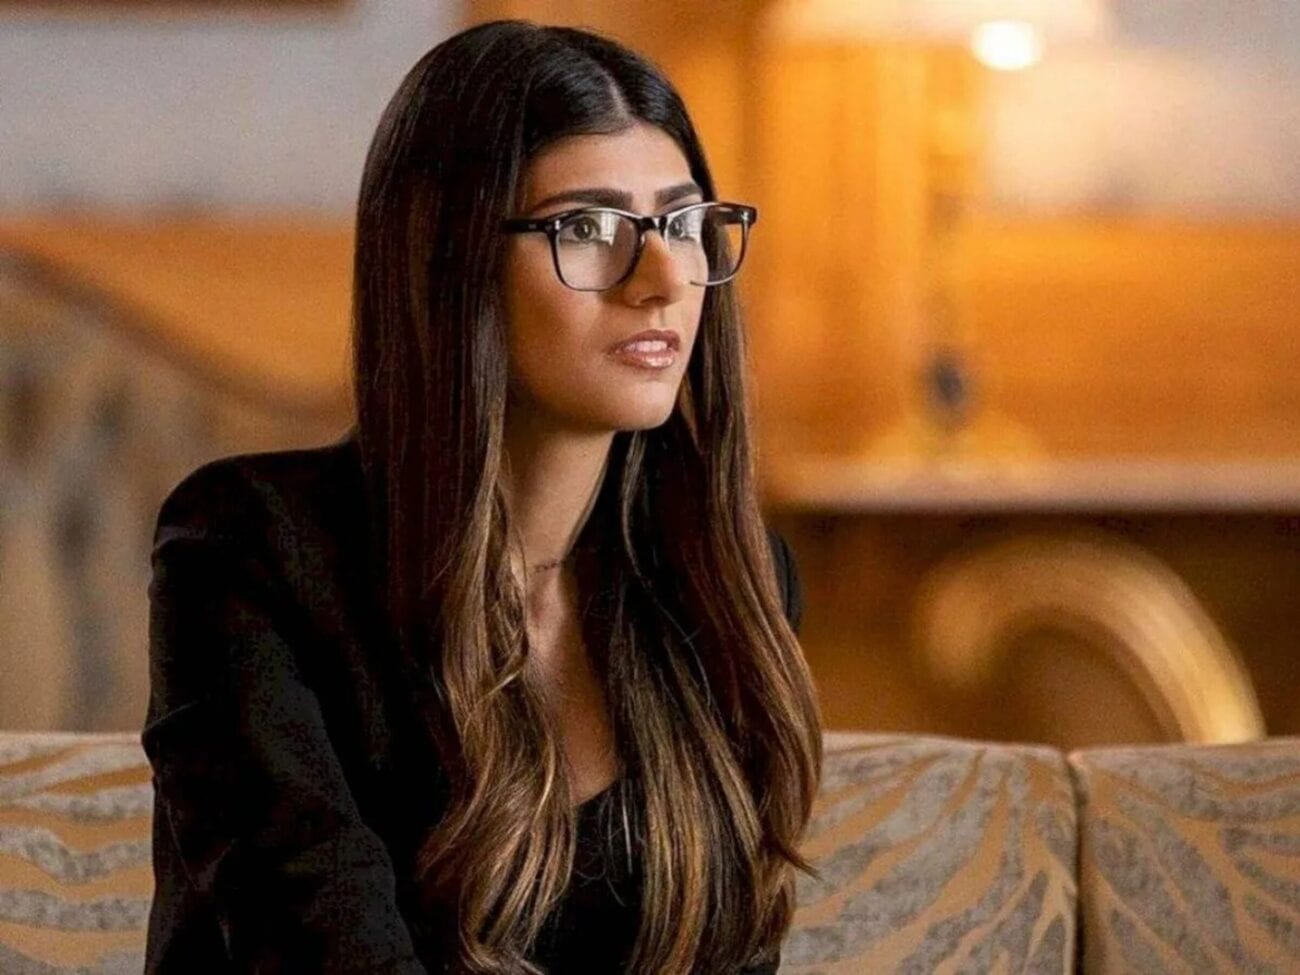 Mia Khalifa is boosting her net worth once again by creating an OnlyFans account. But with how against the porn industry she is, is she being hypocritical?